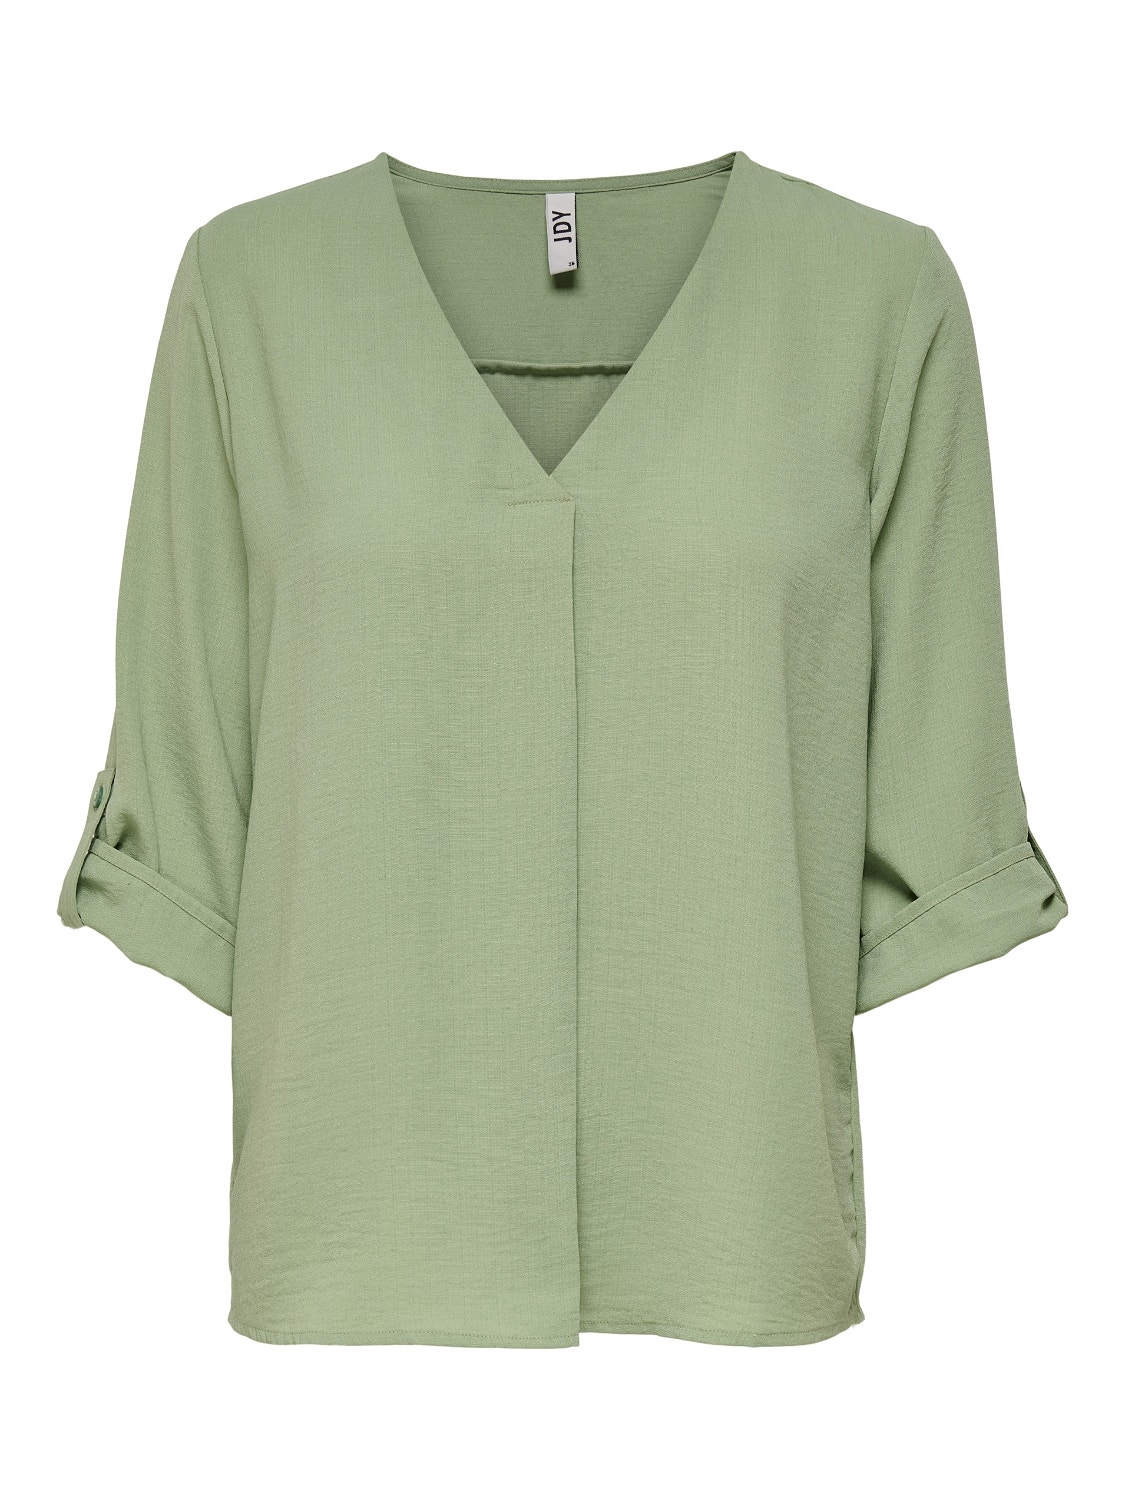 ONLY Loose Fit V-Neck Fold-up cuffs Volume sleeves Top -Basil - 15226911